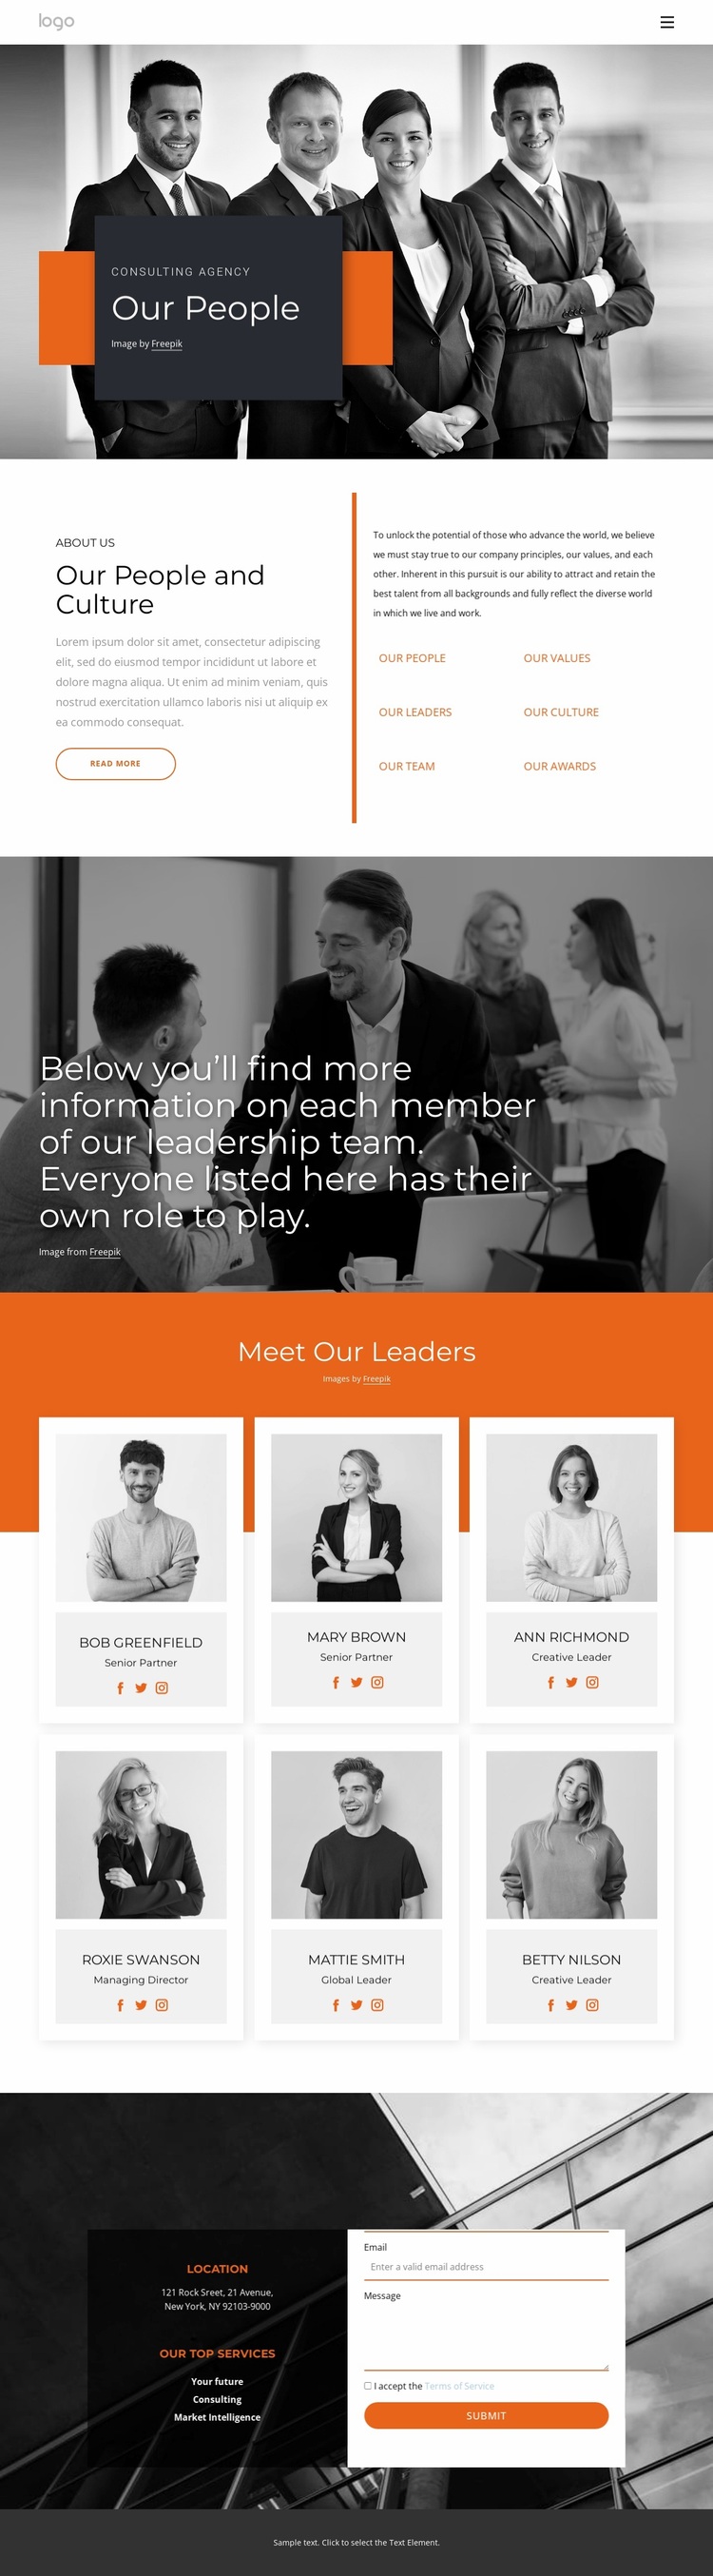 Our people and our culture Website Design